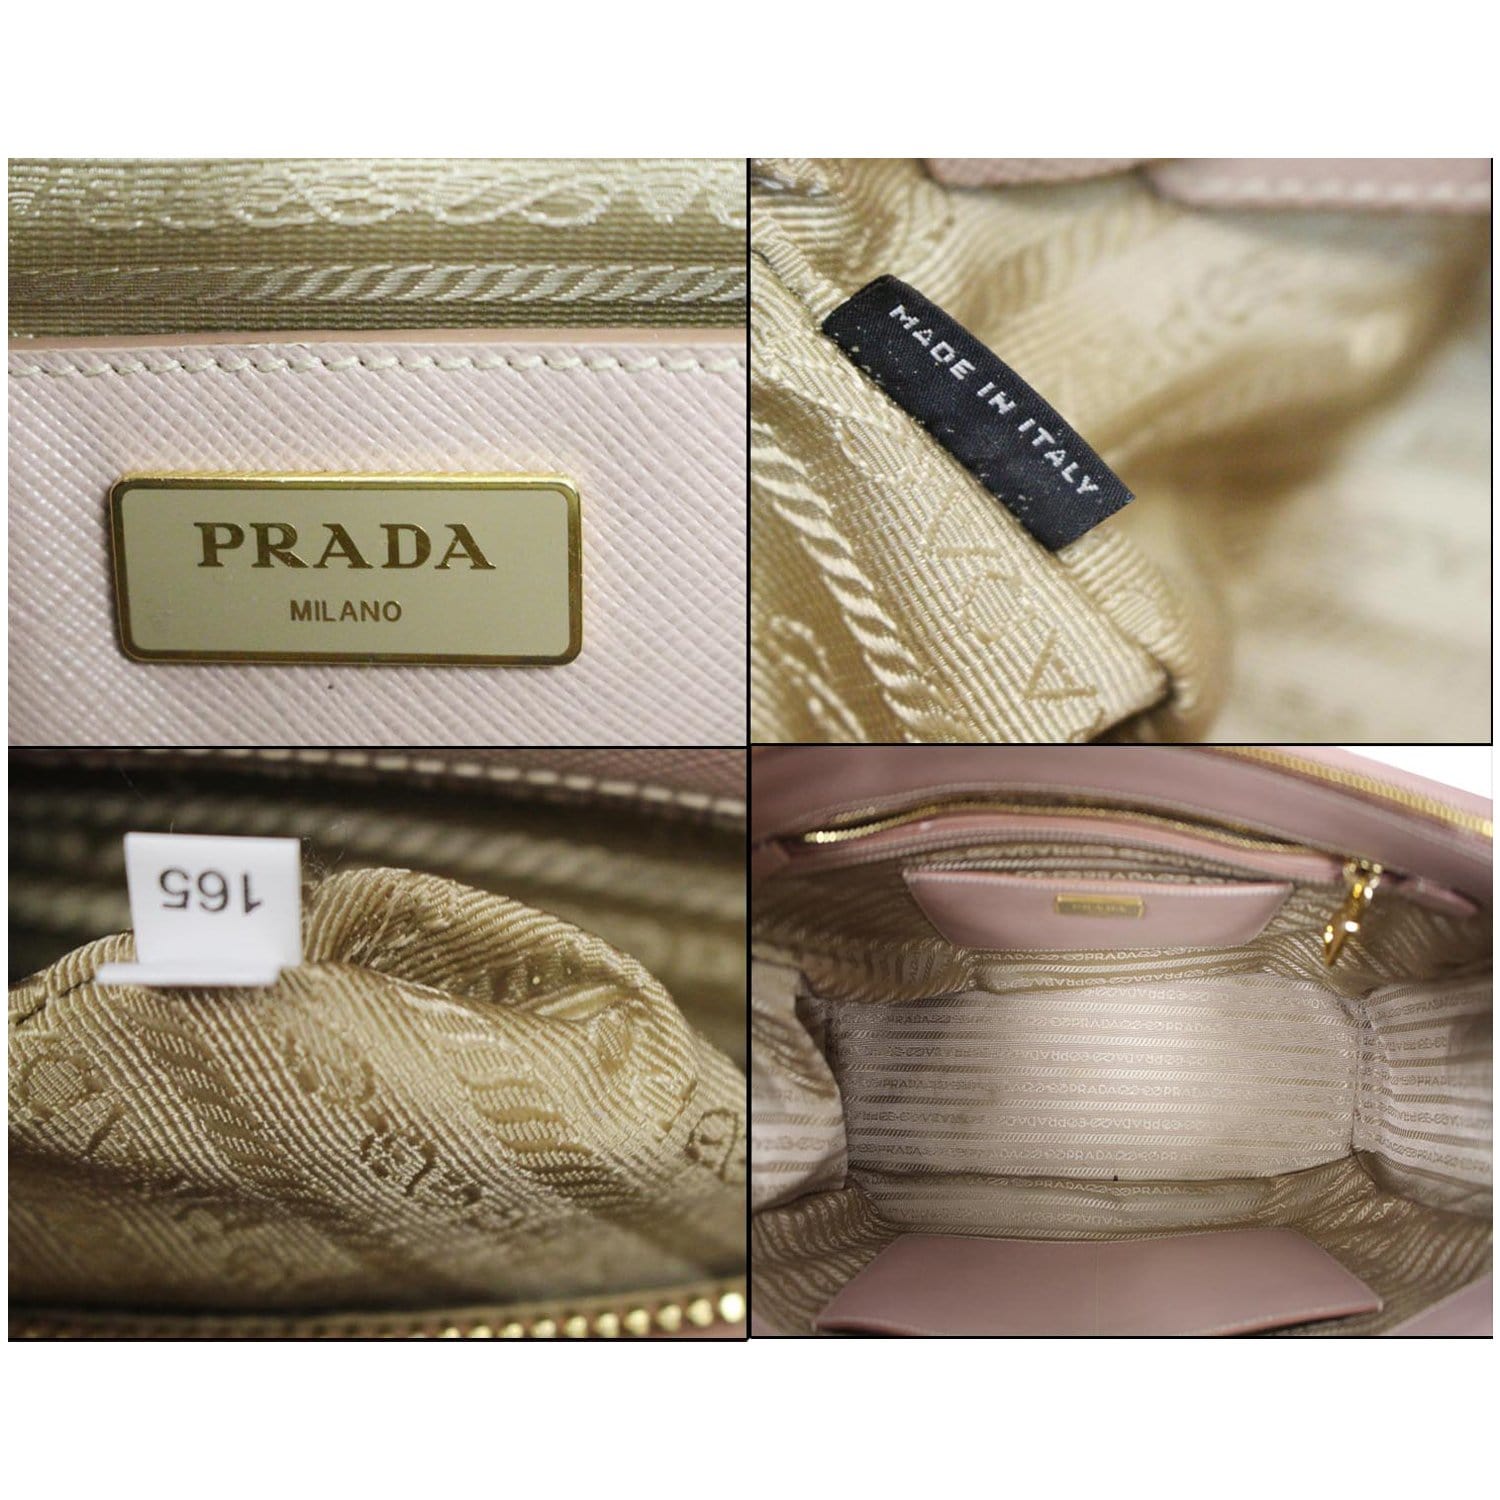 Prada Double Zip Lux Tote Saffiano Leather Large Pink 2397481